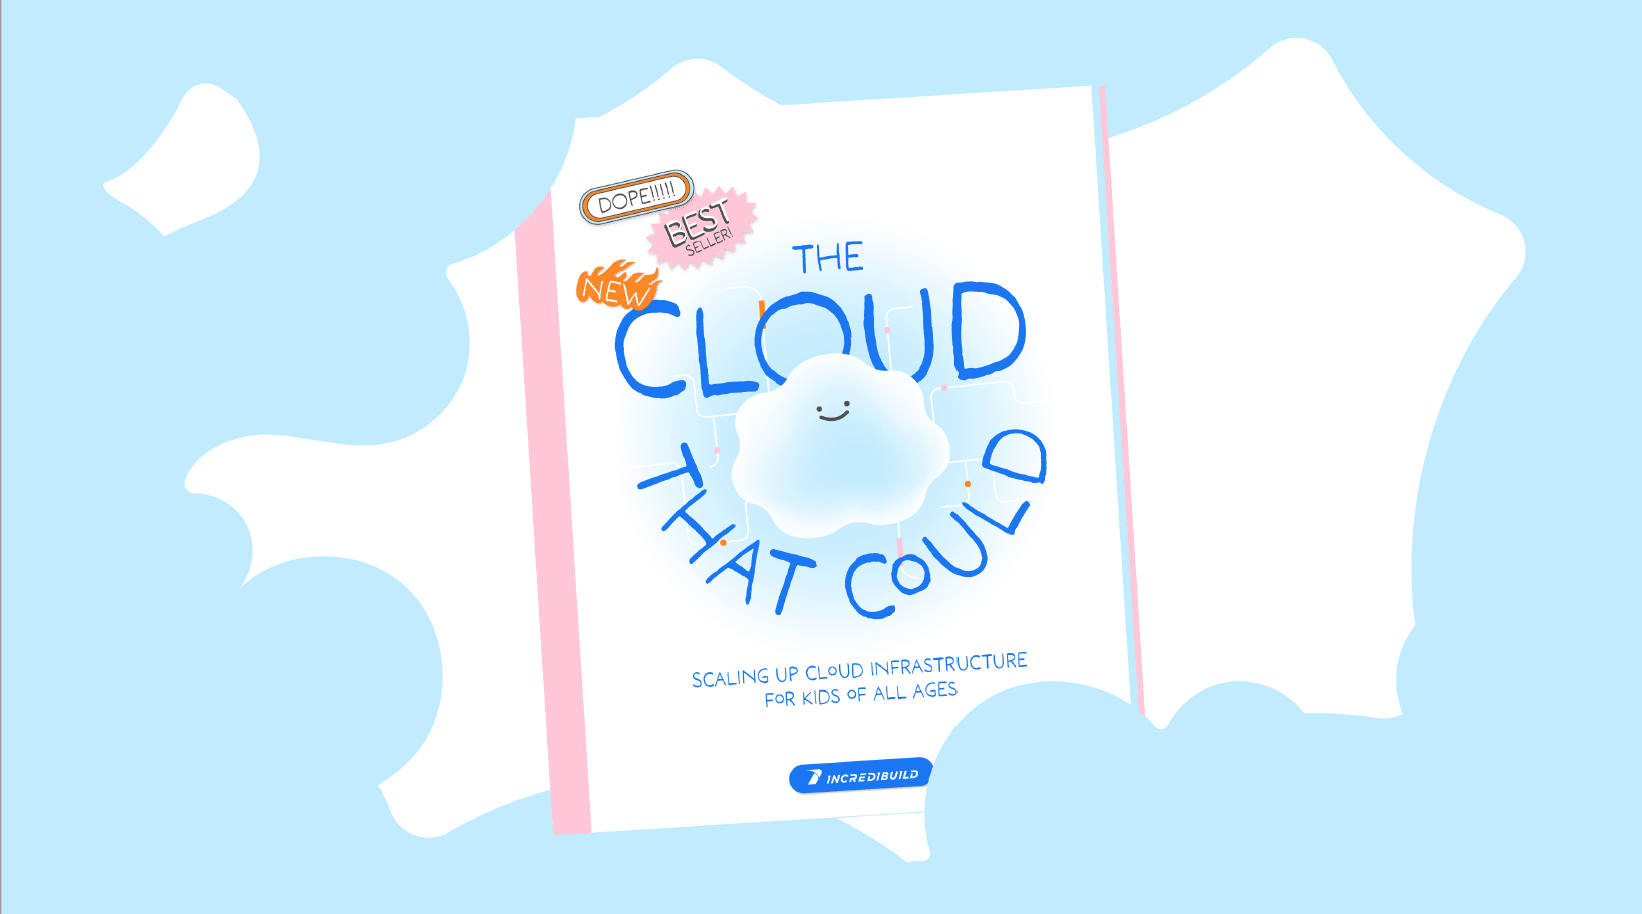 The Cloud that Could